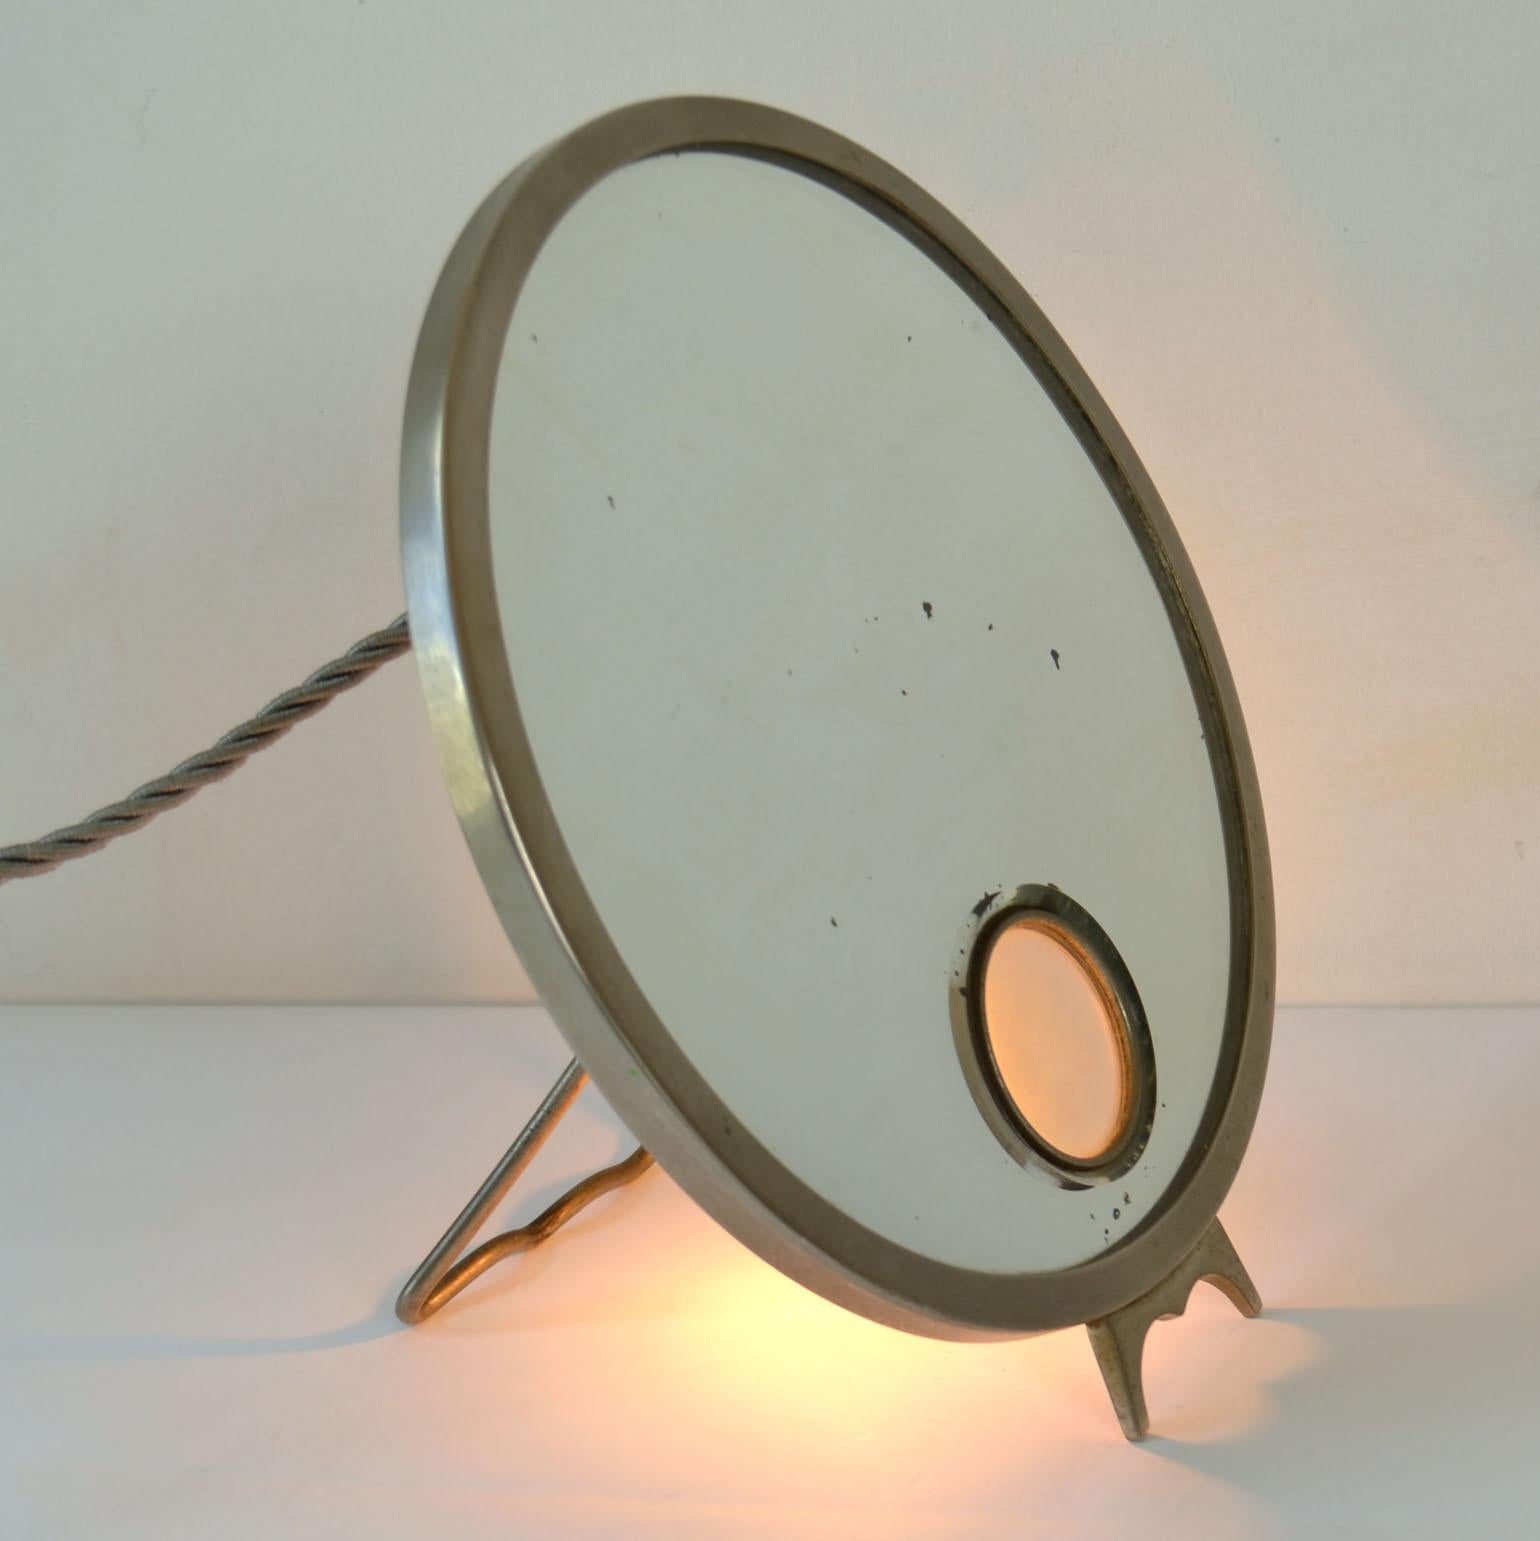 The Brot Mirophar adjustable vanity table mirror with nickel plated frame and illuminated glass was created in 1927. The innovation of the Brot was the concept of an illuminated magnifying mirror with opaline glass. They were designed to prevent